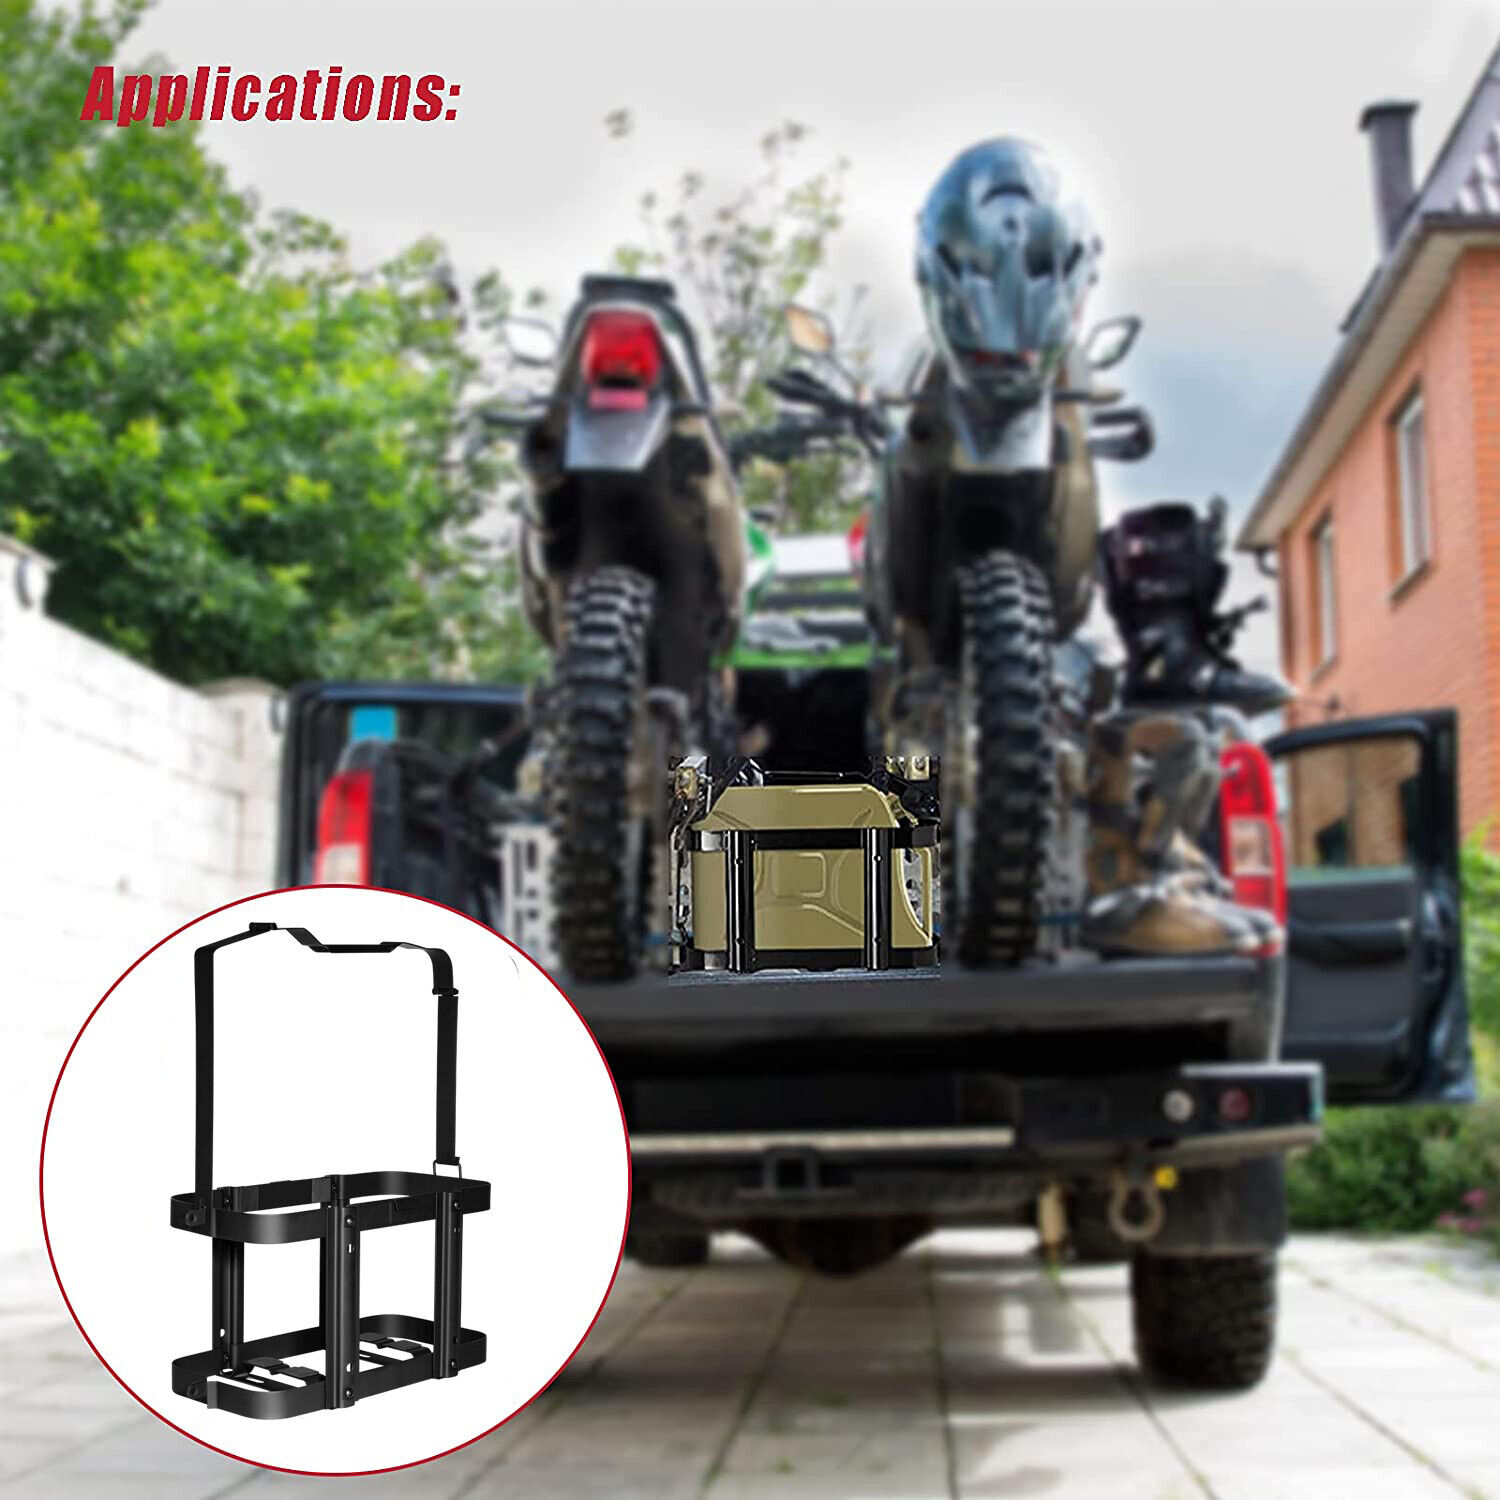 MOTMAX 1-Piece Jerry Can Holder Mount (20L Gas), Black - image 3 of 8